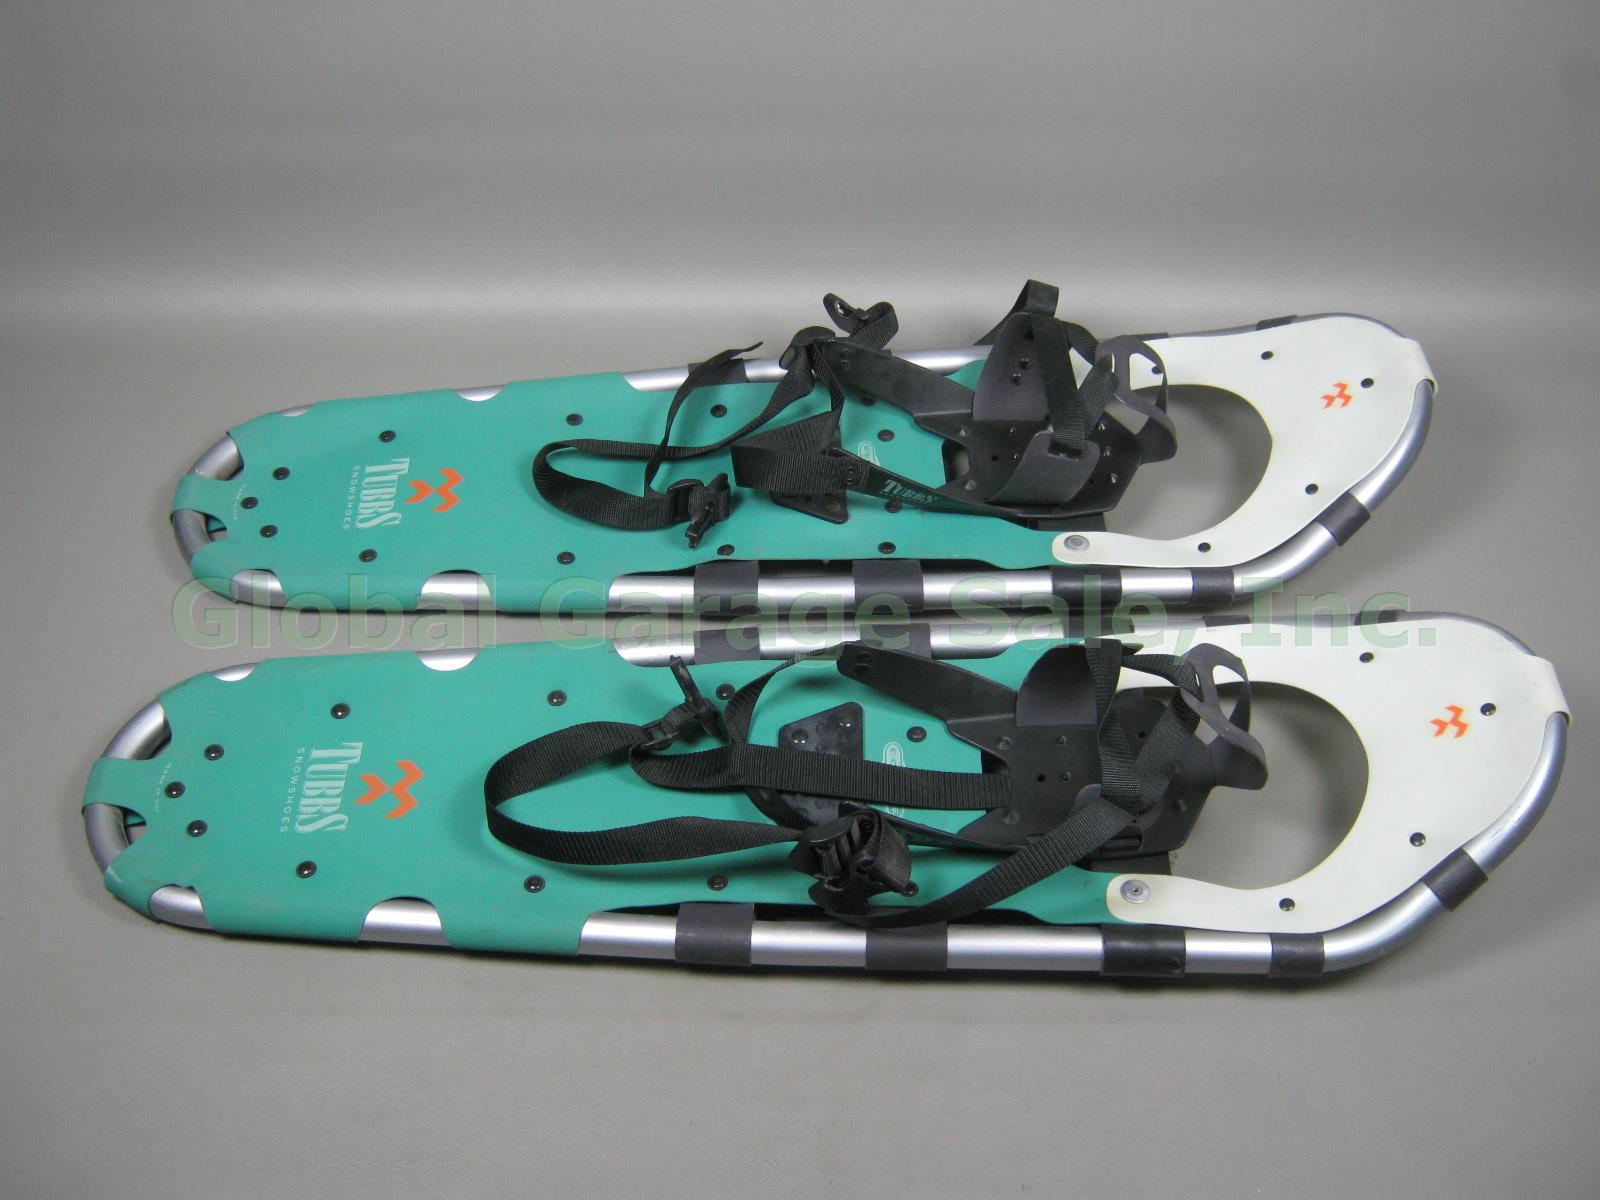 Tubbs Eclipse 32" Recreational Snowshoes Excellent Condition! No Reserve Price!